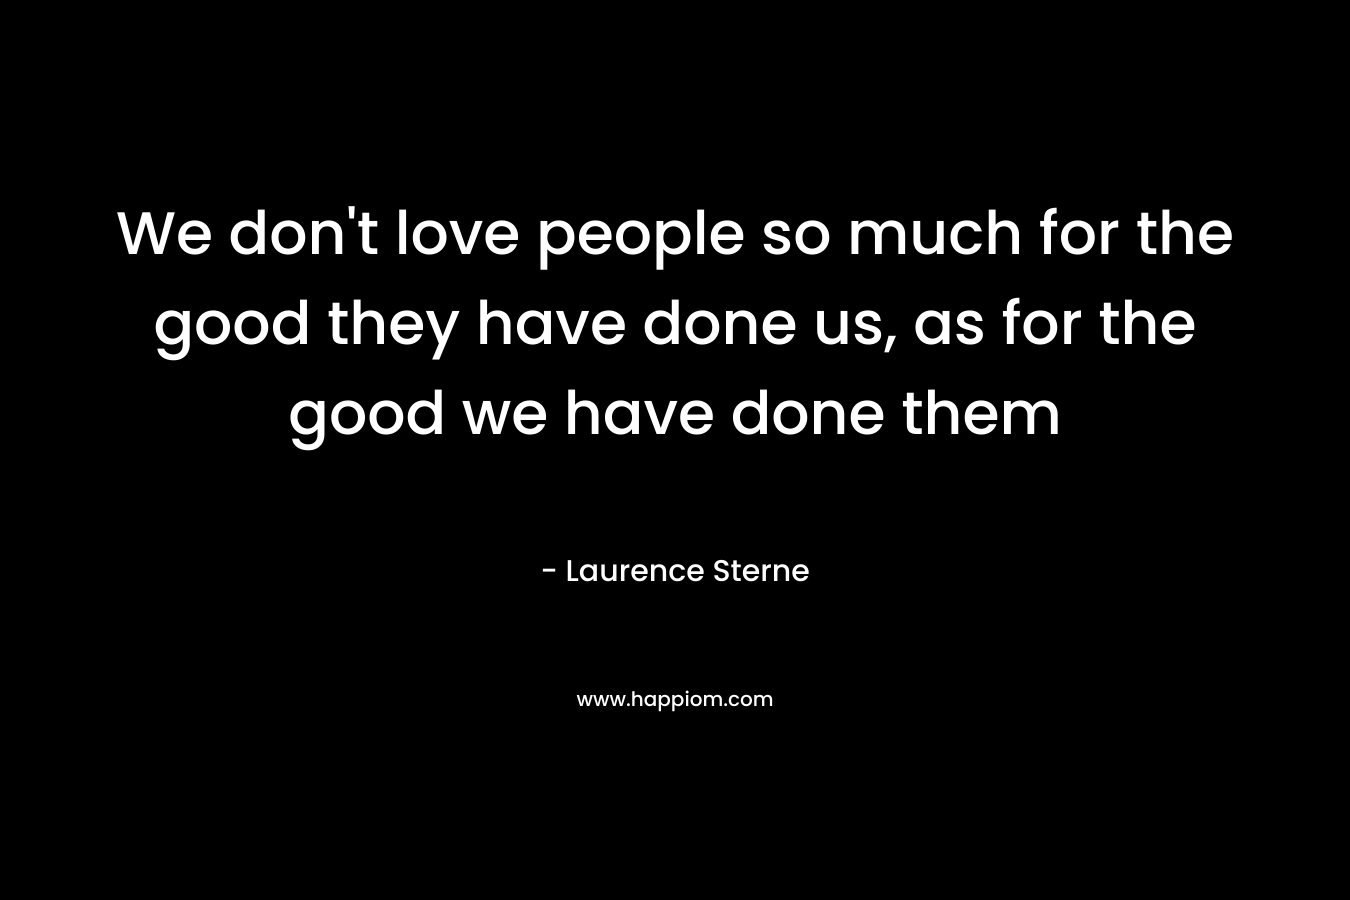 We don’t love people so much for the good they have done us, as for the good we have done them – Laurence Sterne